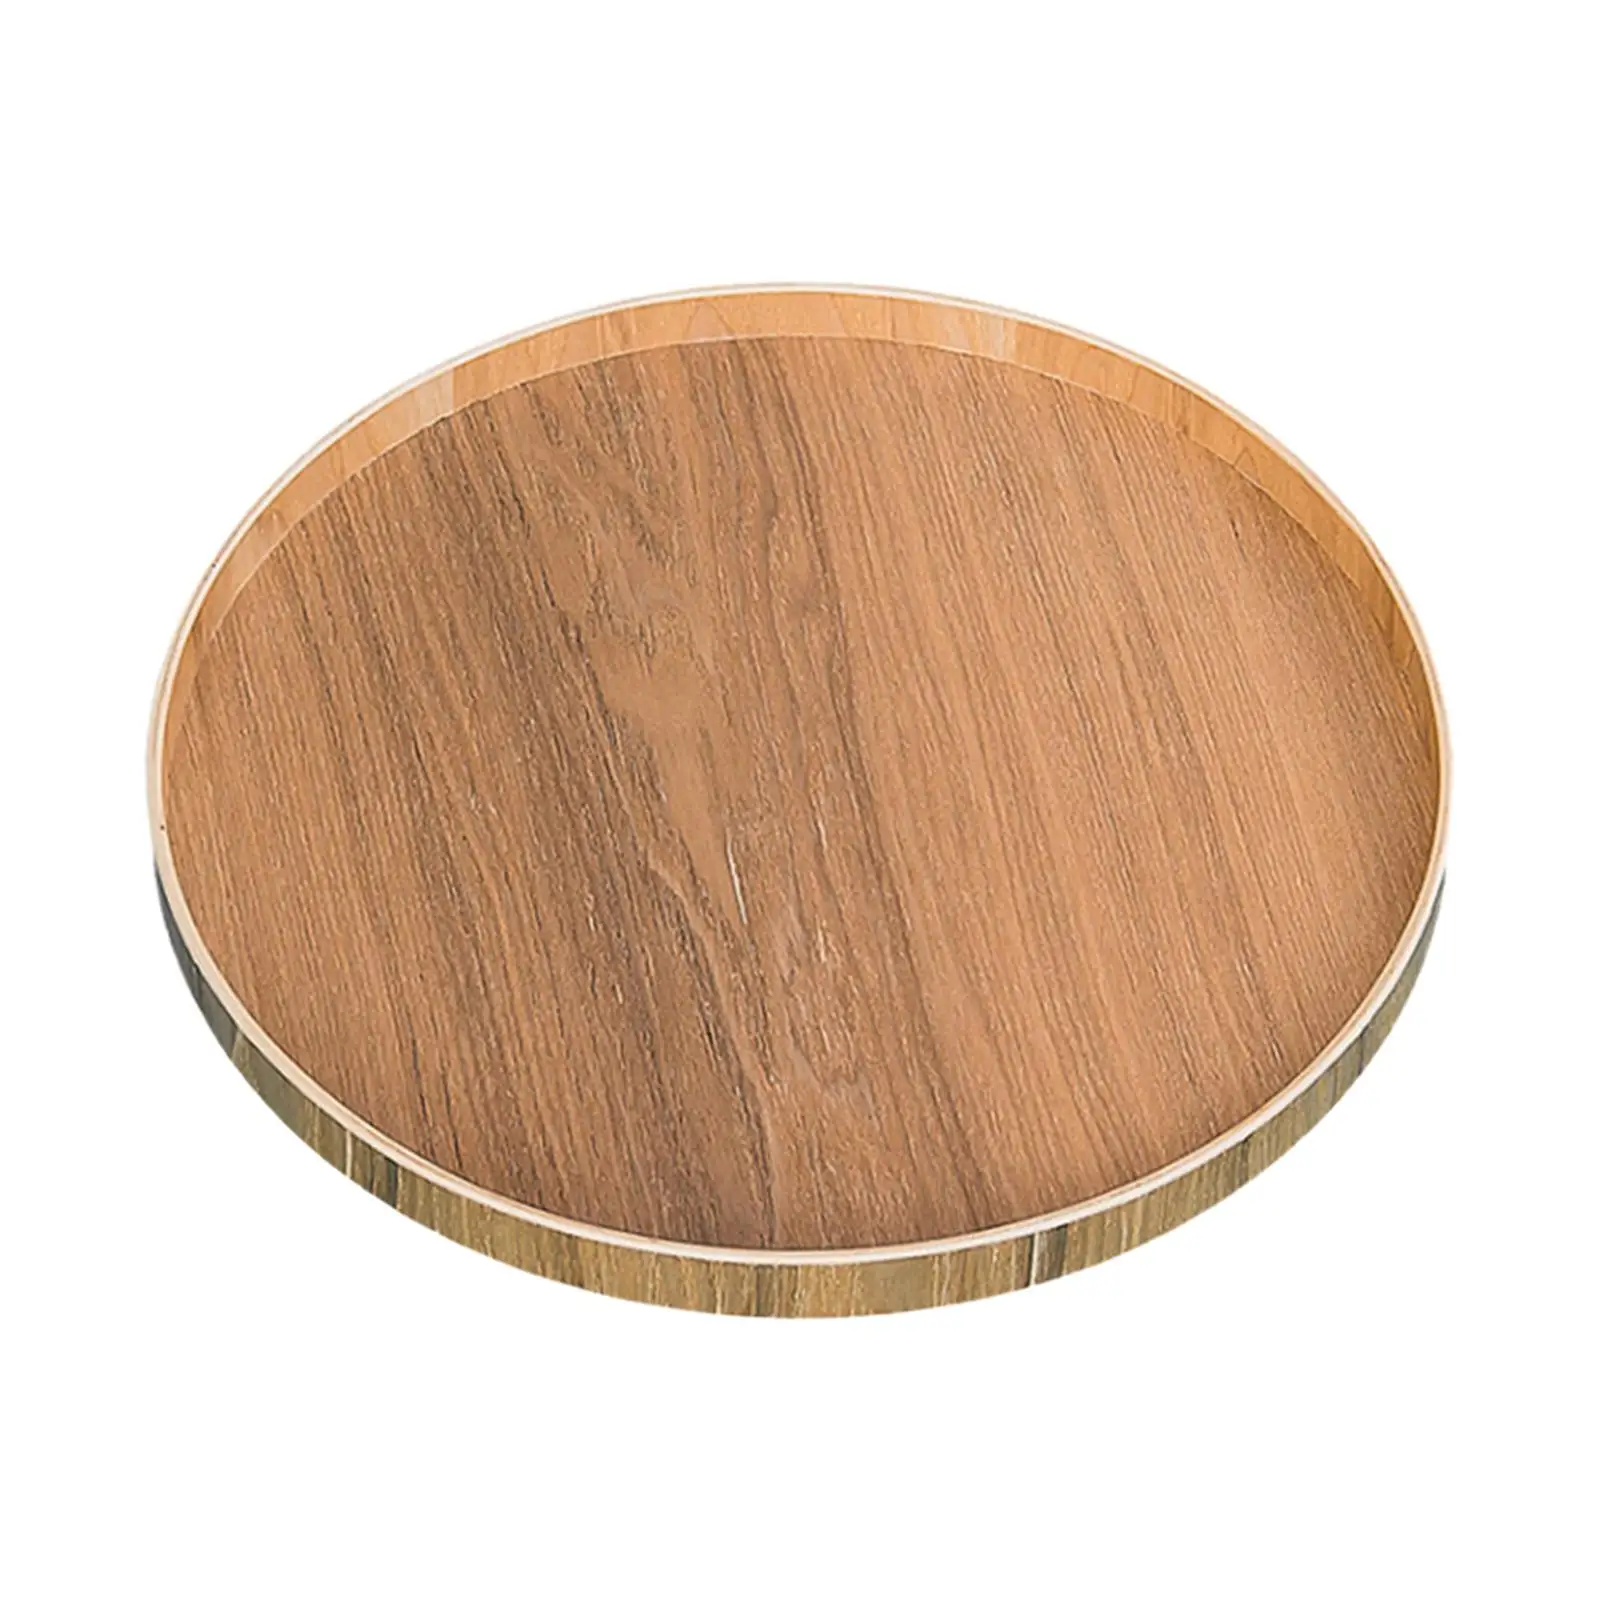 Wooden Serving Plate Dessert Tray Appetizer Organizer for Table Centerpiece Pantry Kitchen Countertop Cabinet Dining Table